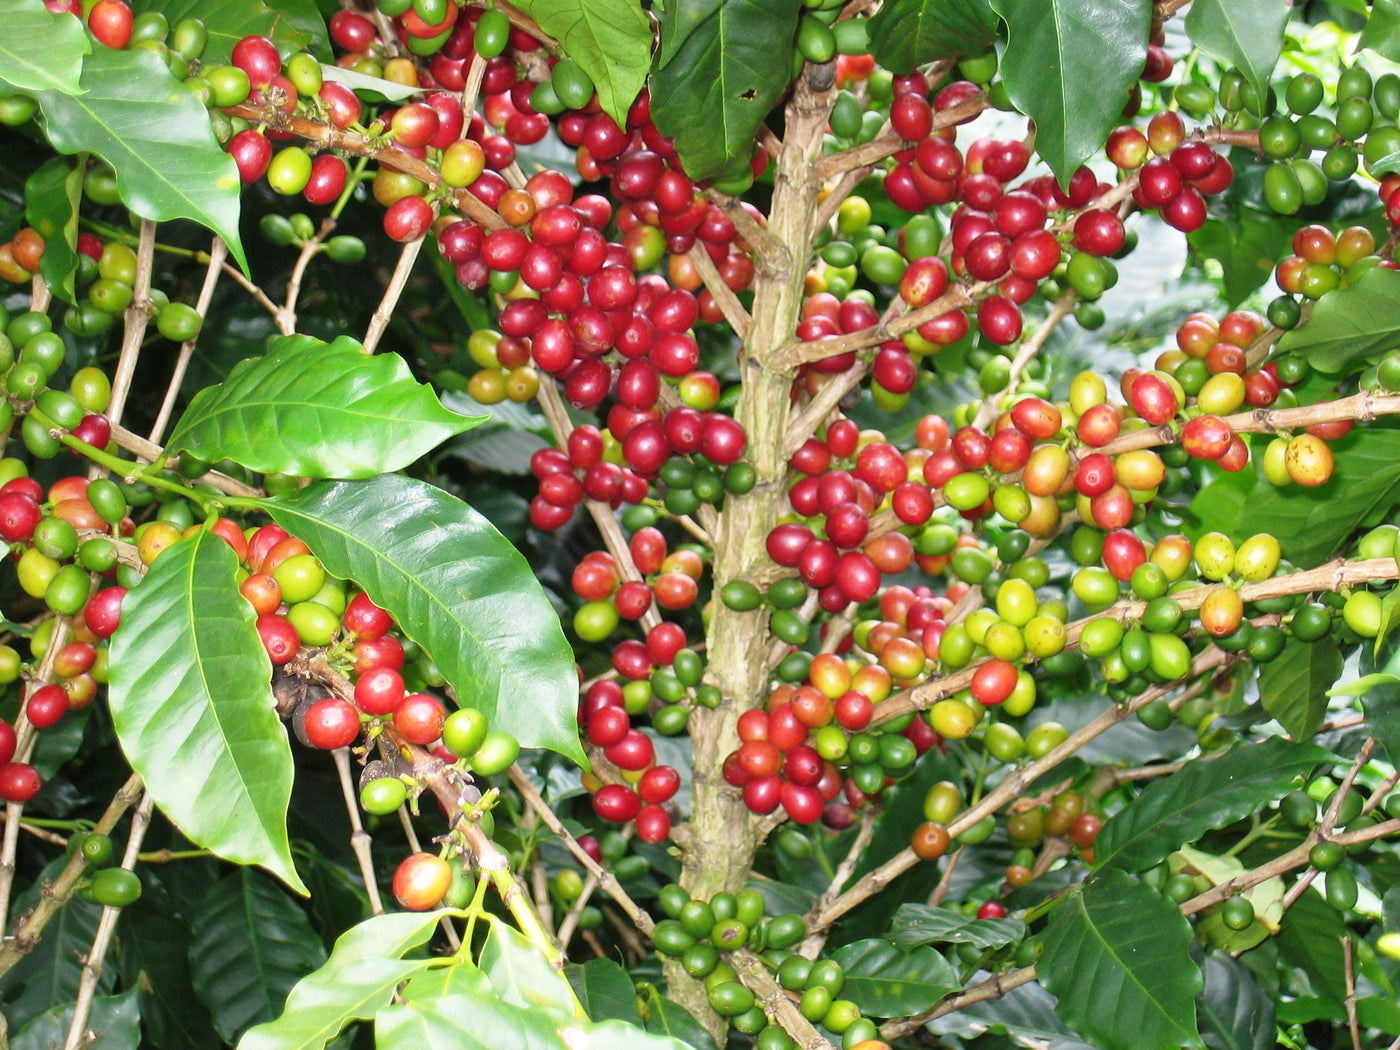 Red coffee cherries still attached to the coffee plant